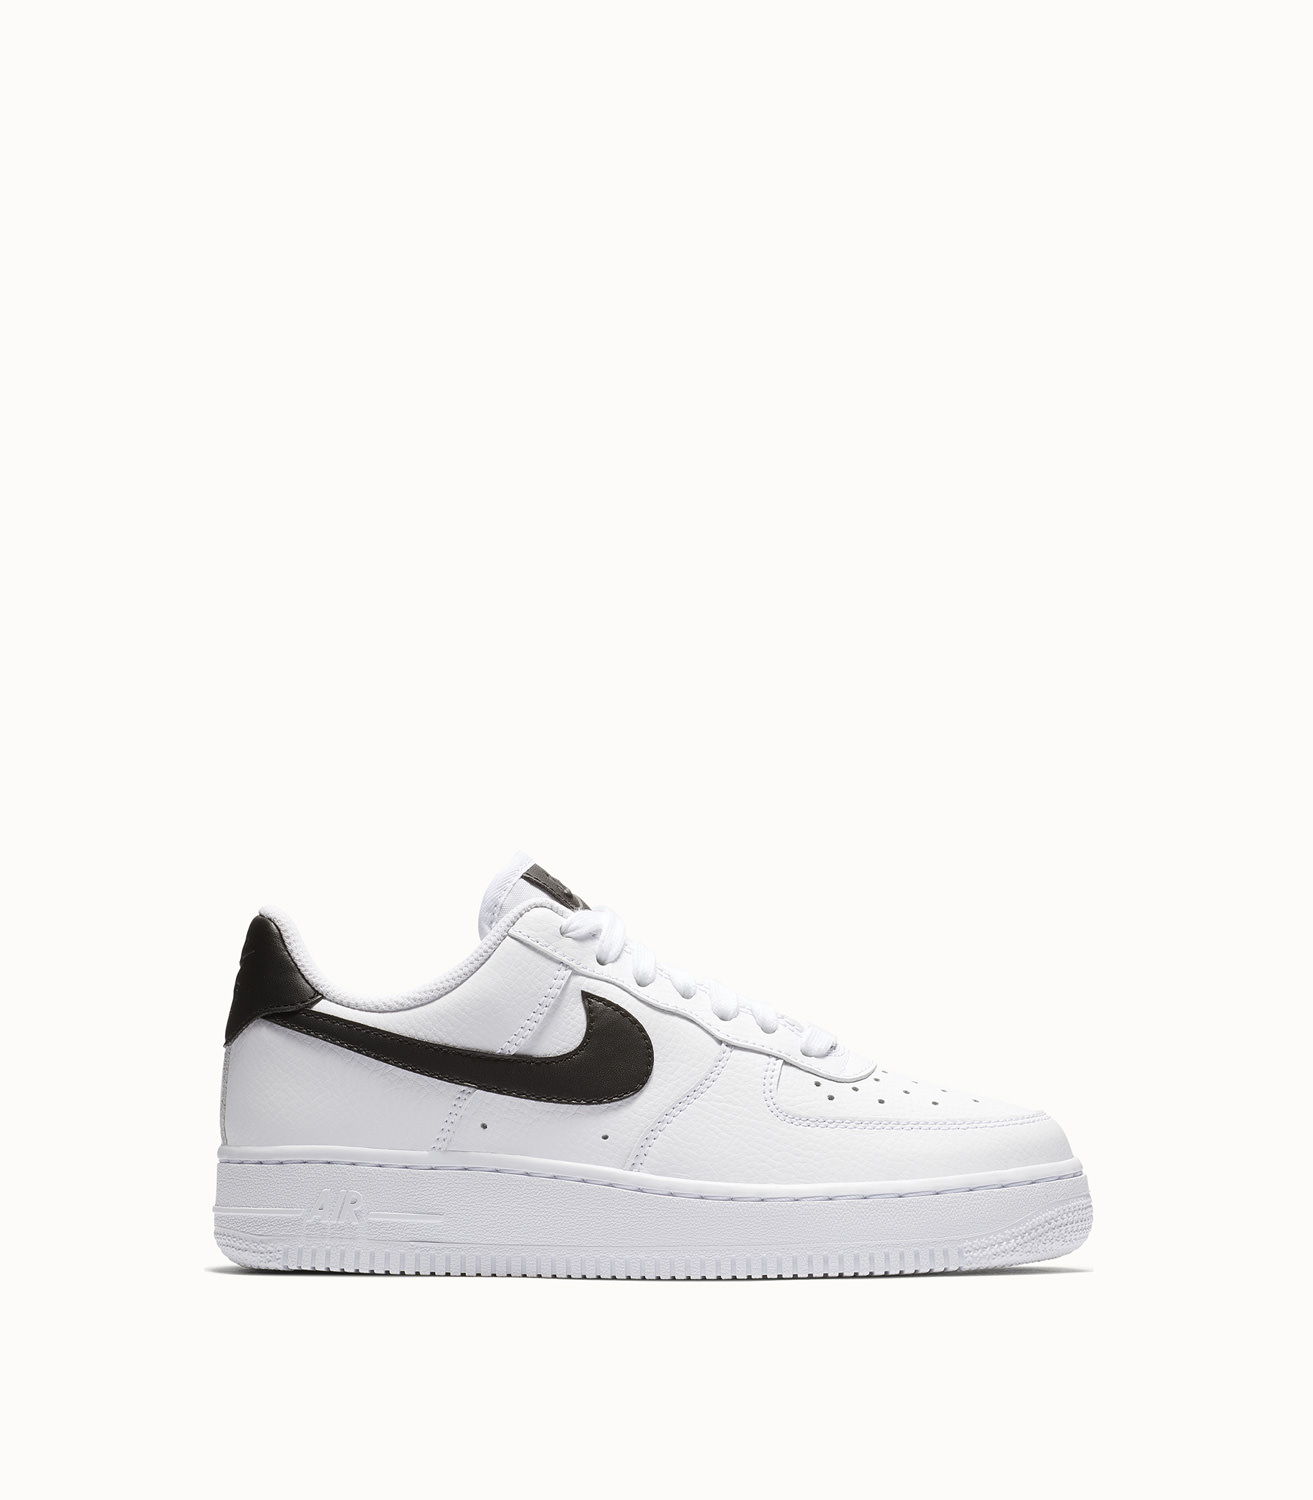 NIKE SNEAKERS AIR FORCE 1 07 COLORE BIANCO NERO | Playground